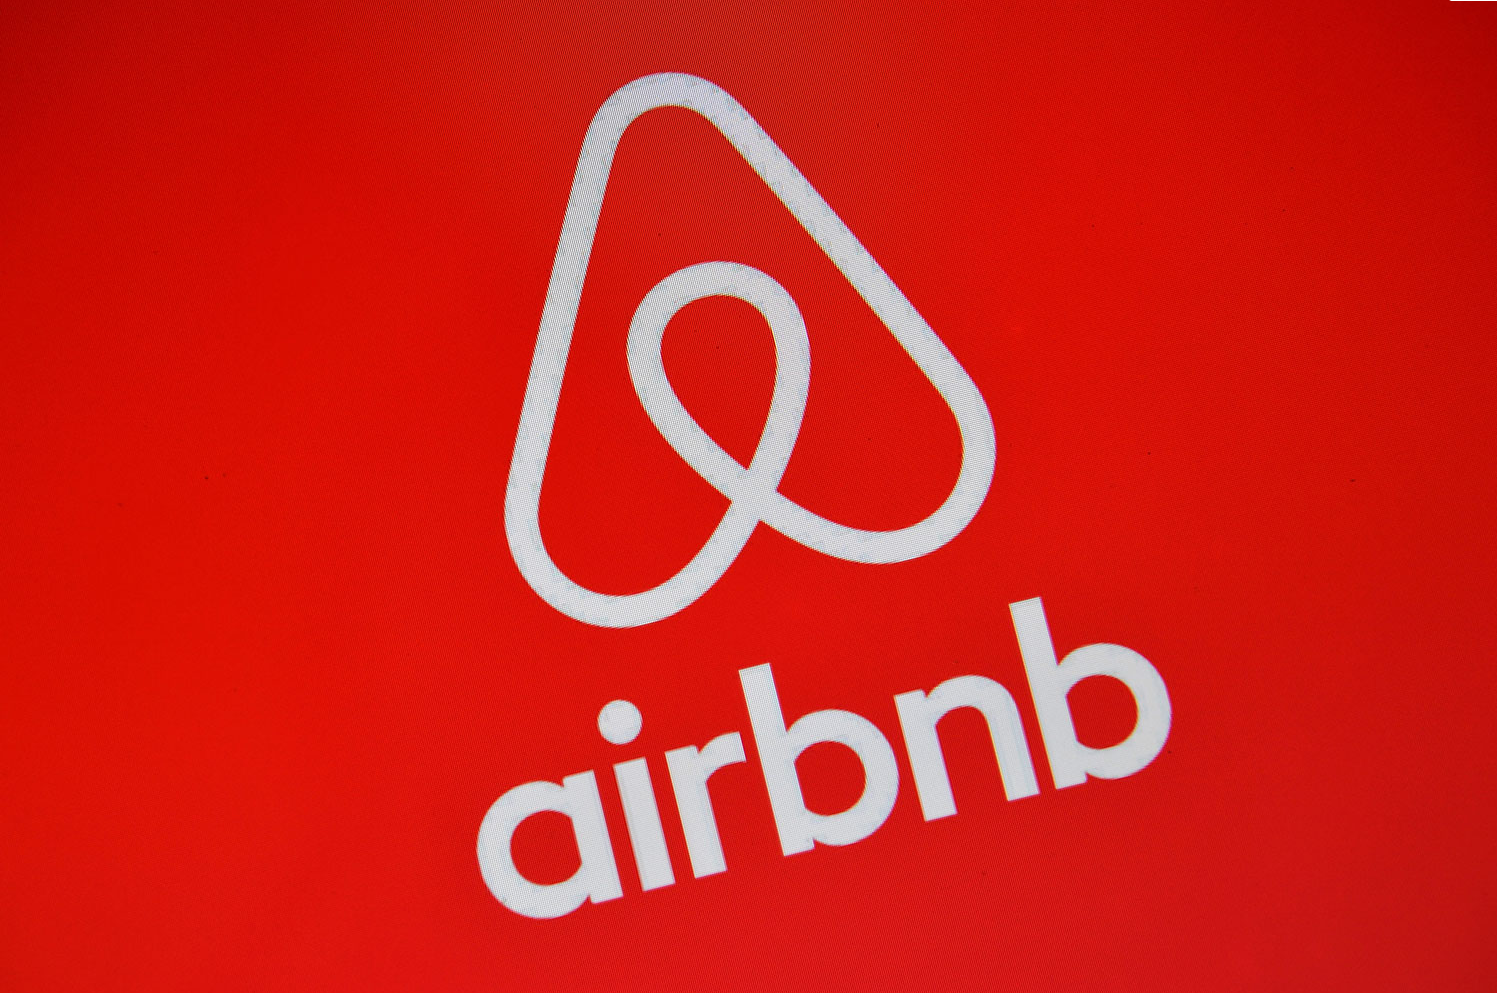 Airbnb to Block and Cancel All Washington, D.C. Reservations During Inauguration Week